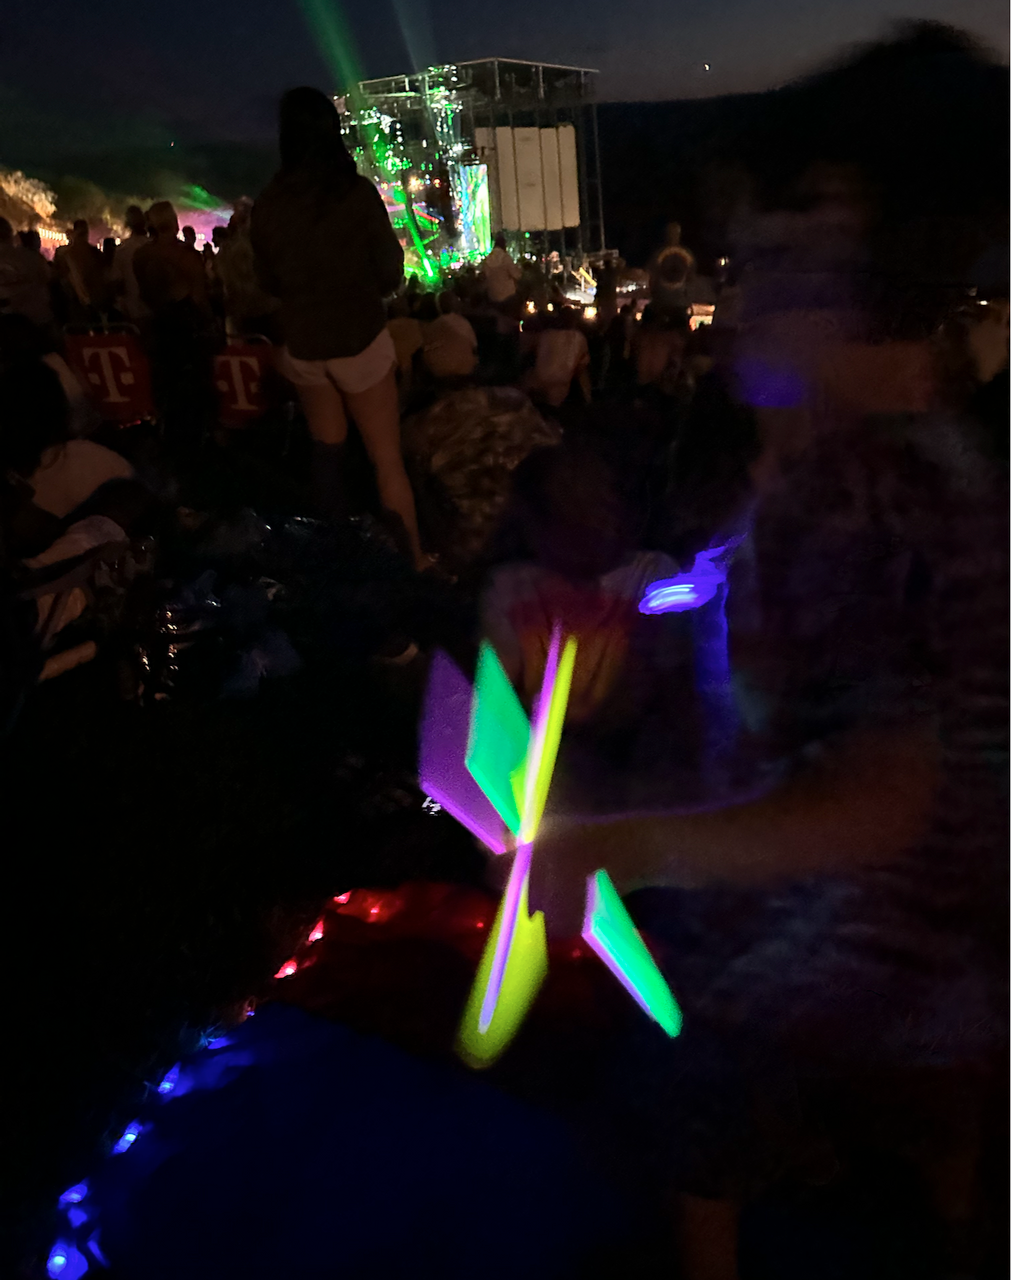 Lighted Beach Blanket for camping, music festivals, concerts